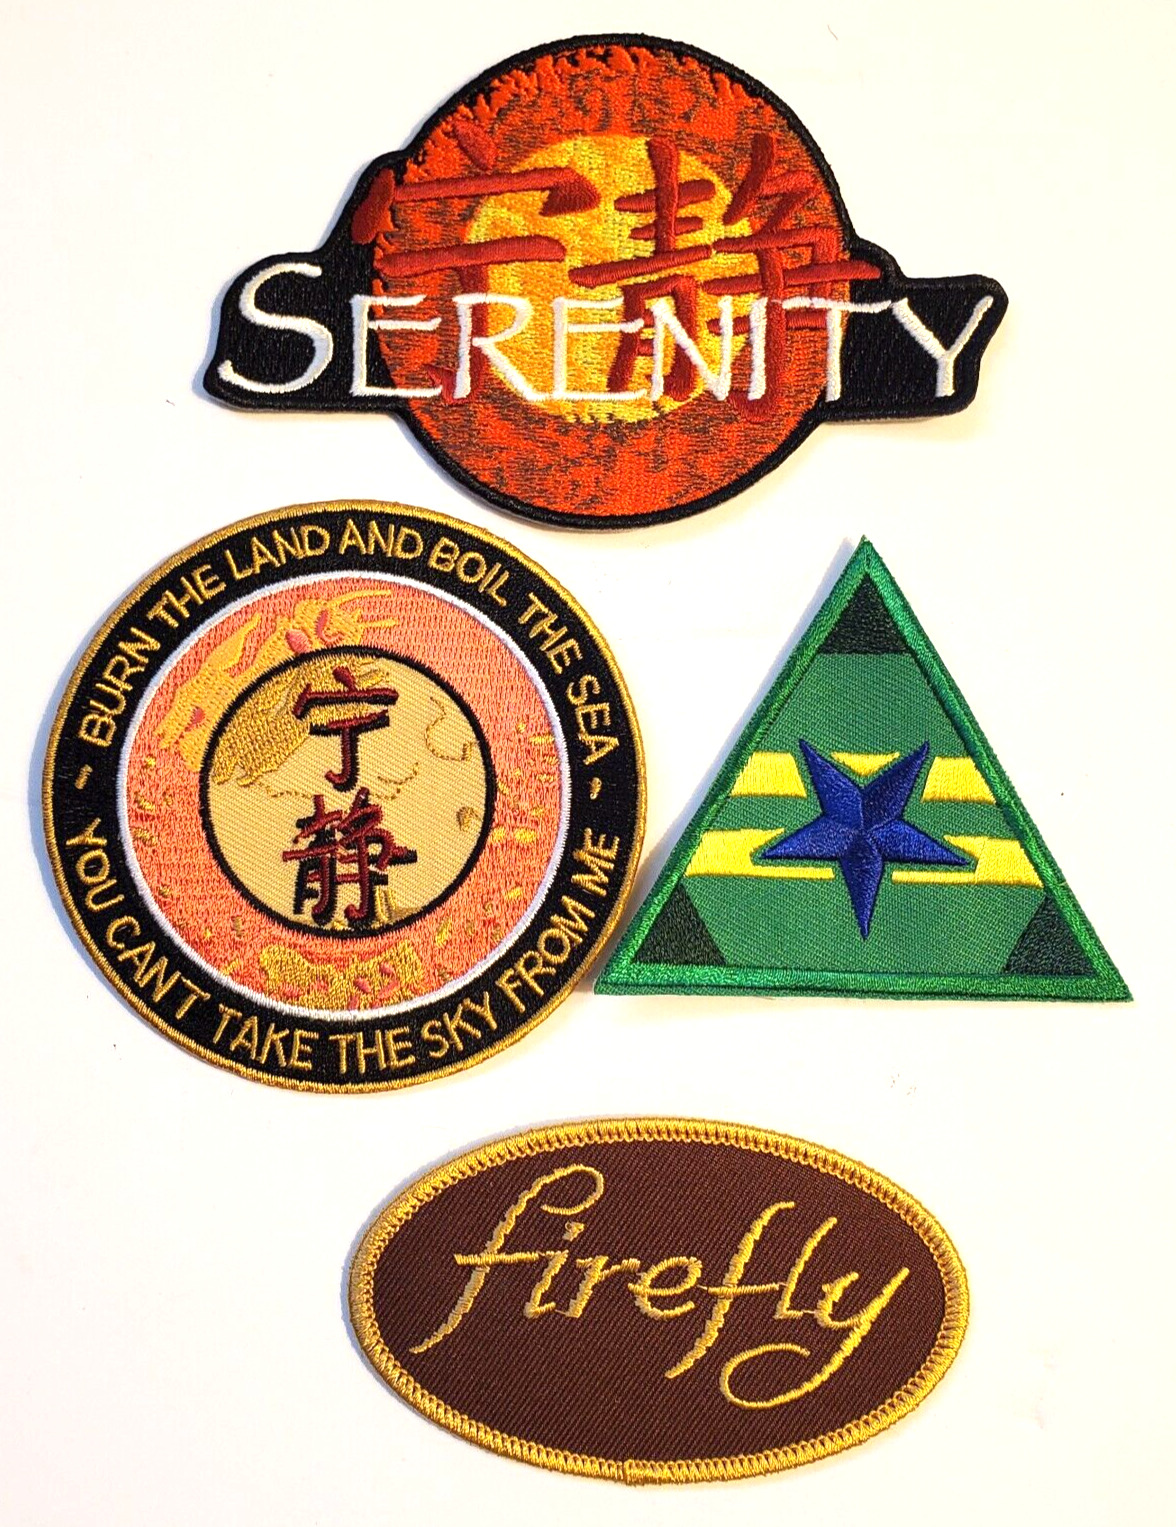 Serenity/Firefly DELUXE Patch Set of 4 Embroidered Patches- Shipped from USA